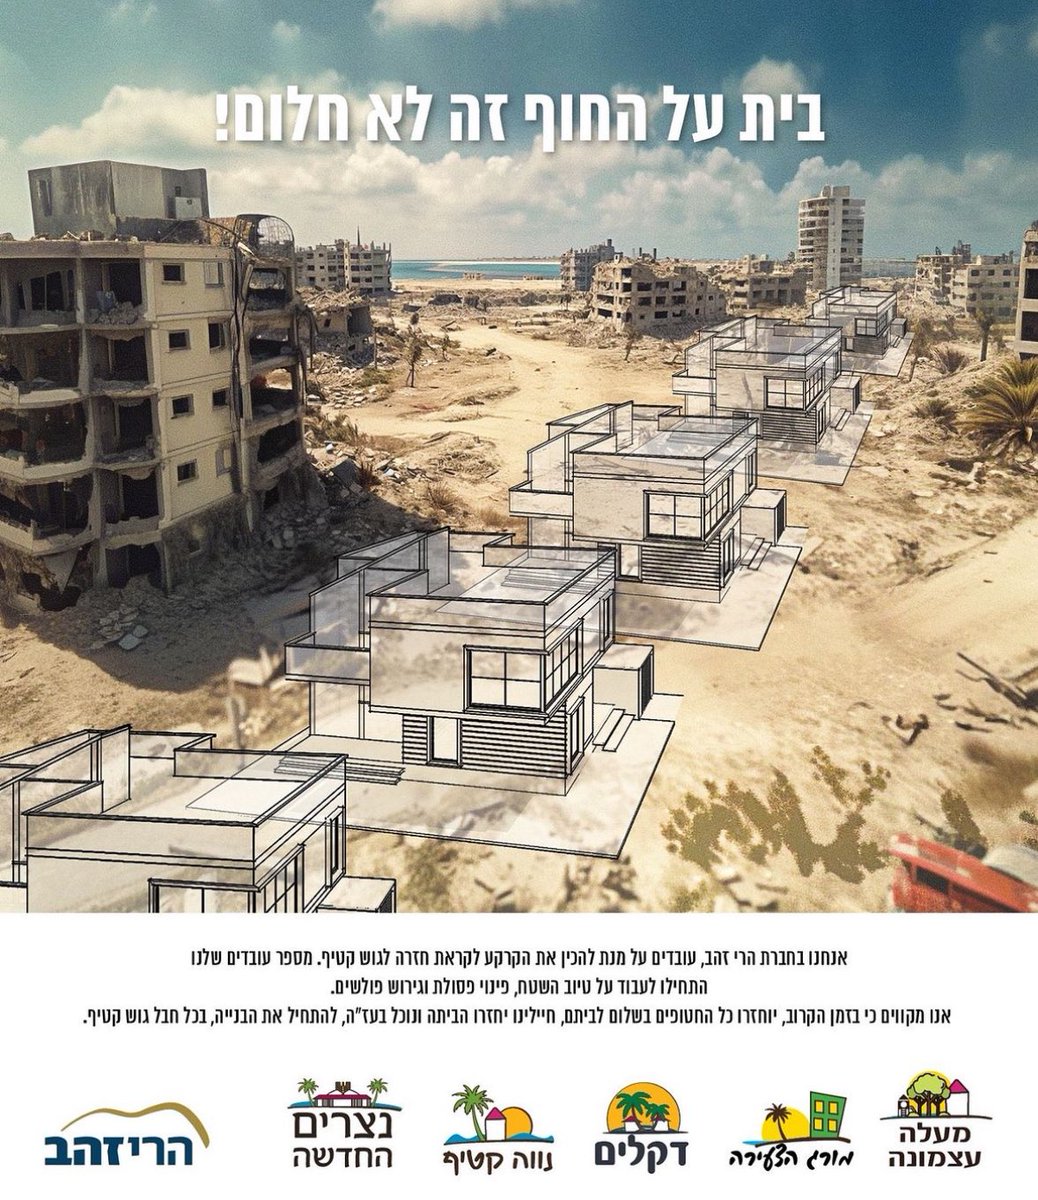 The leading Israeli settlement development company, Harey Zahav, started advertising a pre-sale on beach houses built over Gaza’s rubbles. It was never about Hamas.